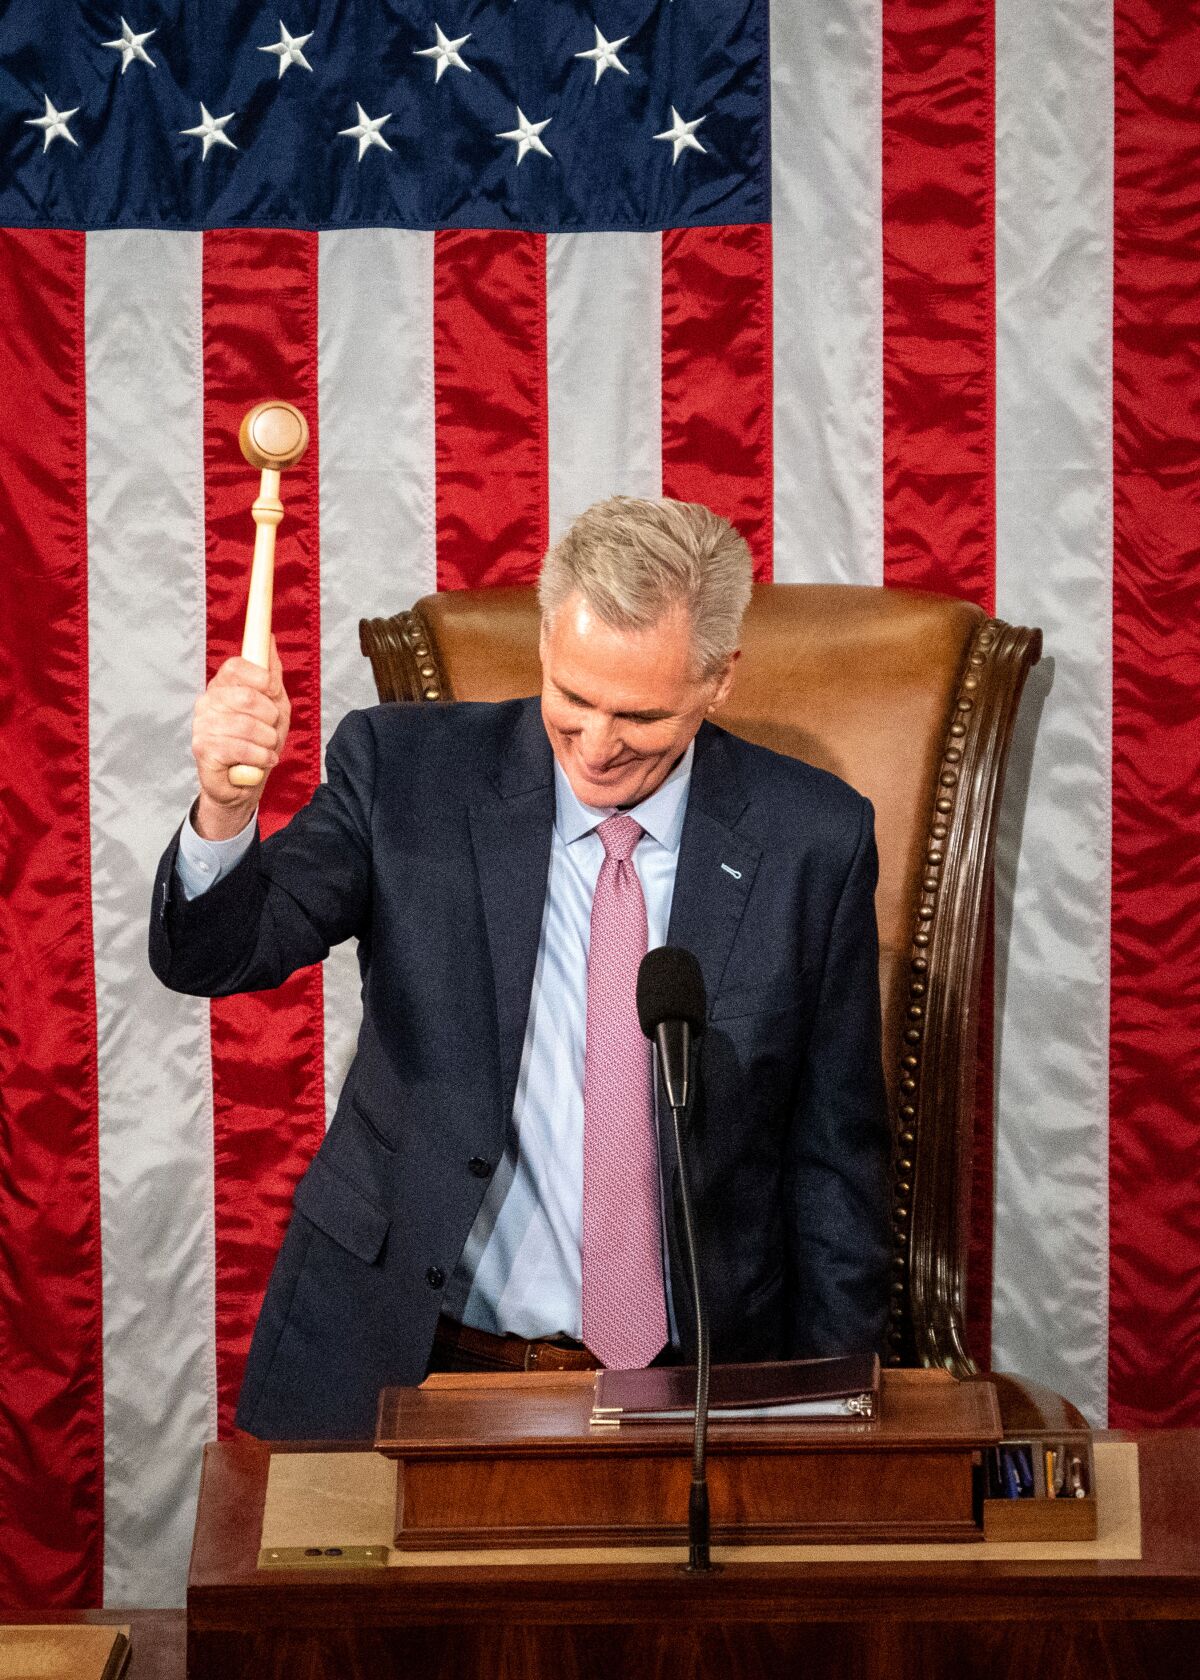 A man lowering a gavel as he stands at a lectern in front of a U.S. flag